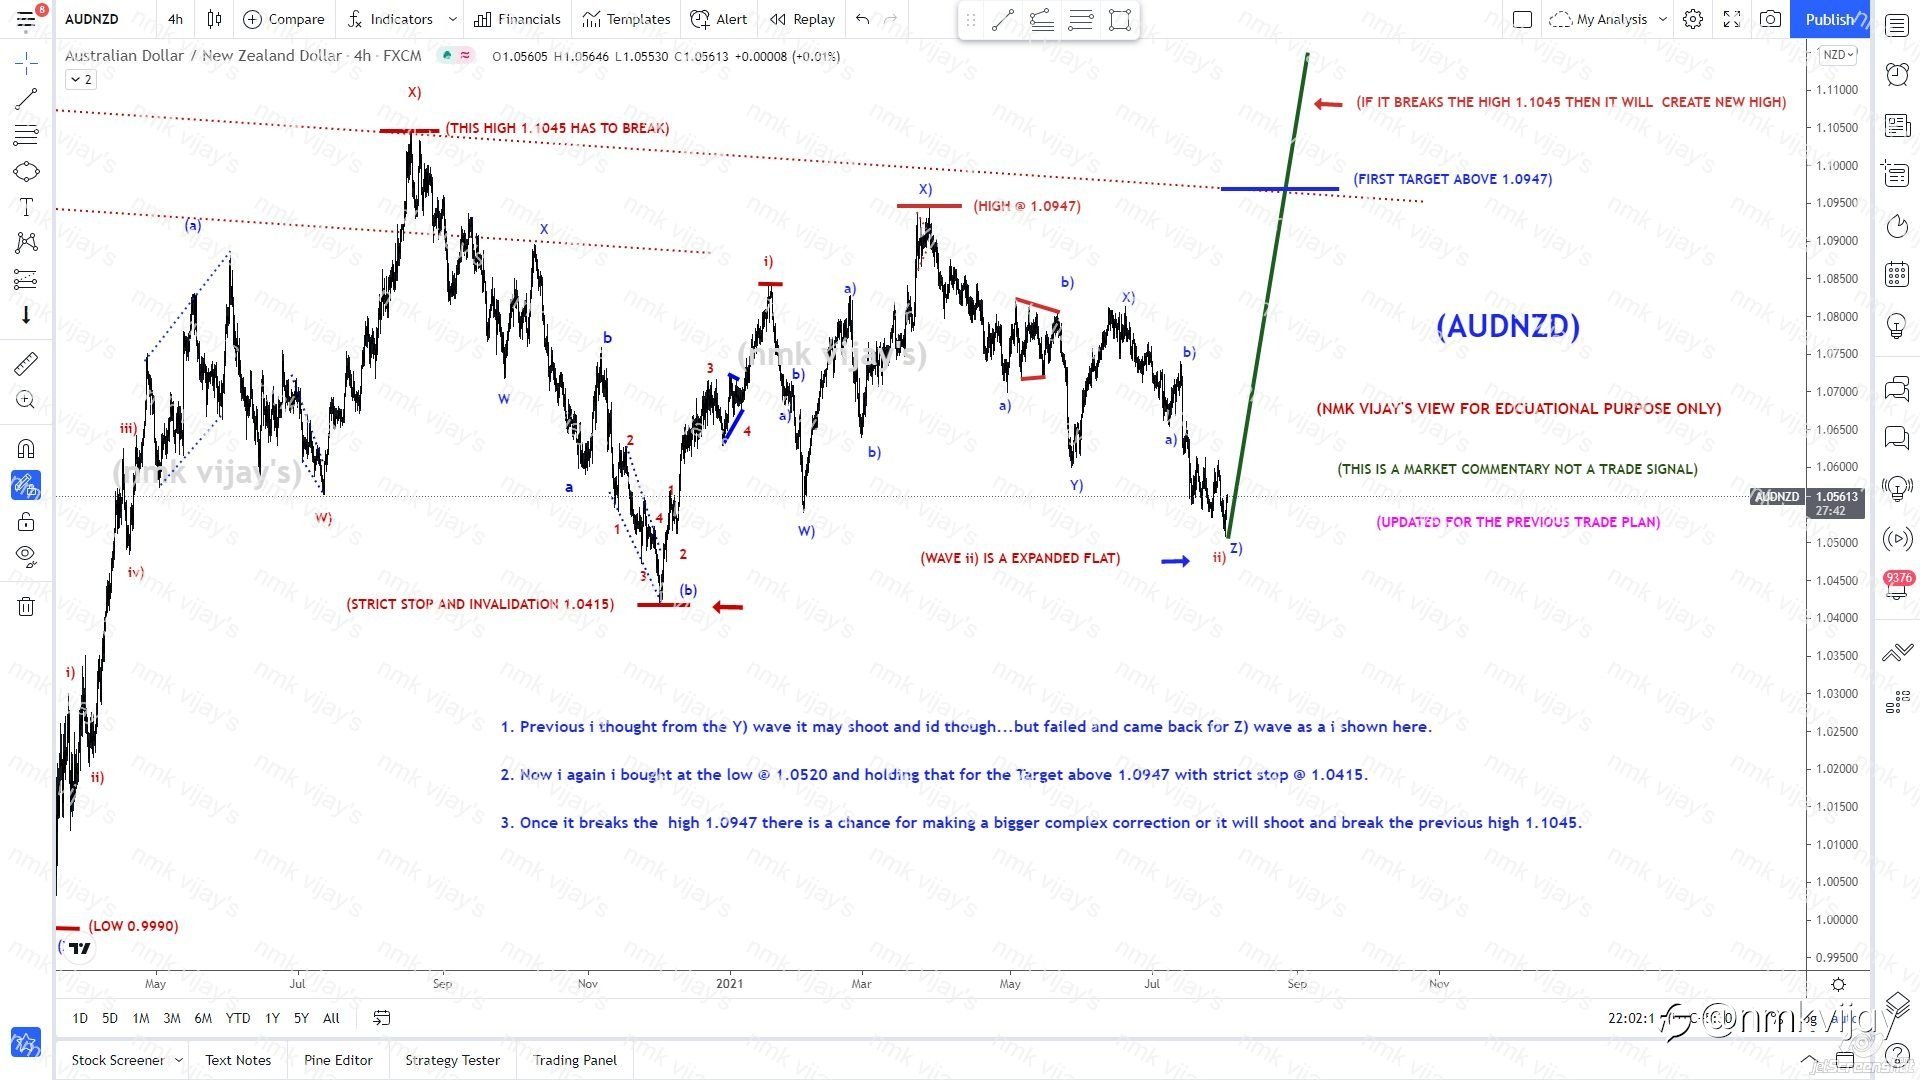 AUDNZD-Expecting a bullish 5 waves to 1.0947 to break...